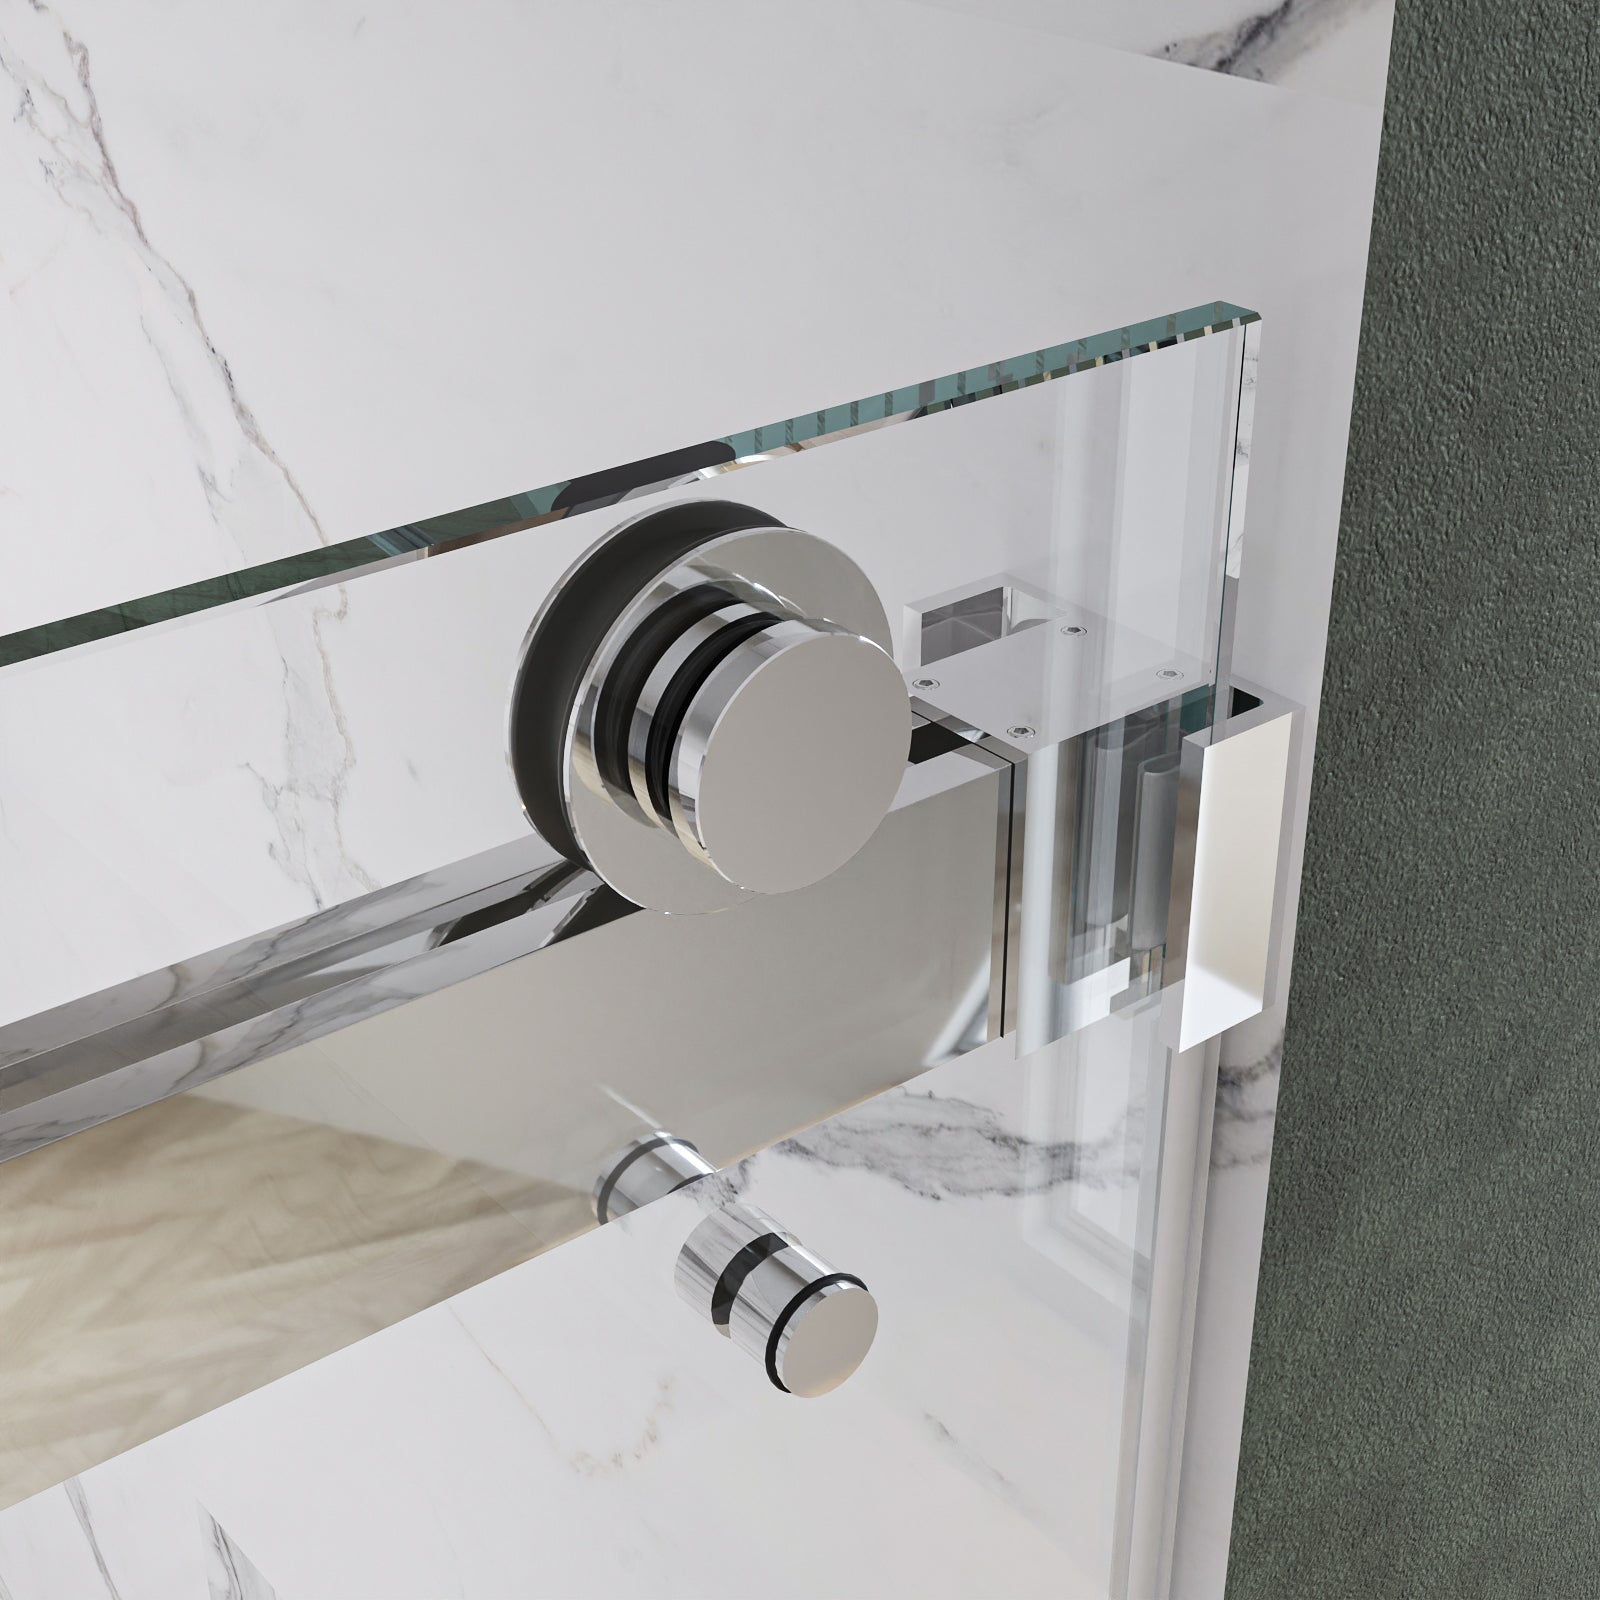 Catalyst Bathtub Frameless Double Sliding Shower Door with 3/8" Clear Tempered Glass